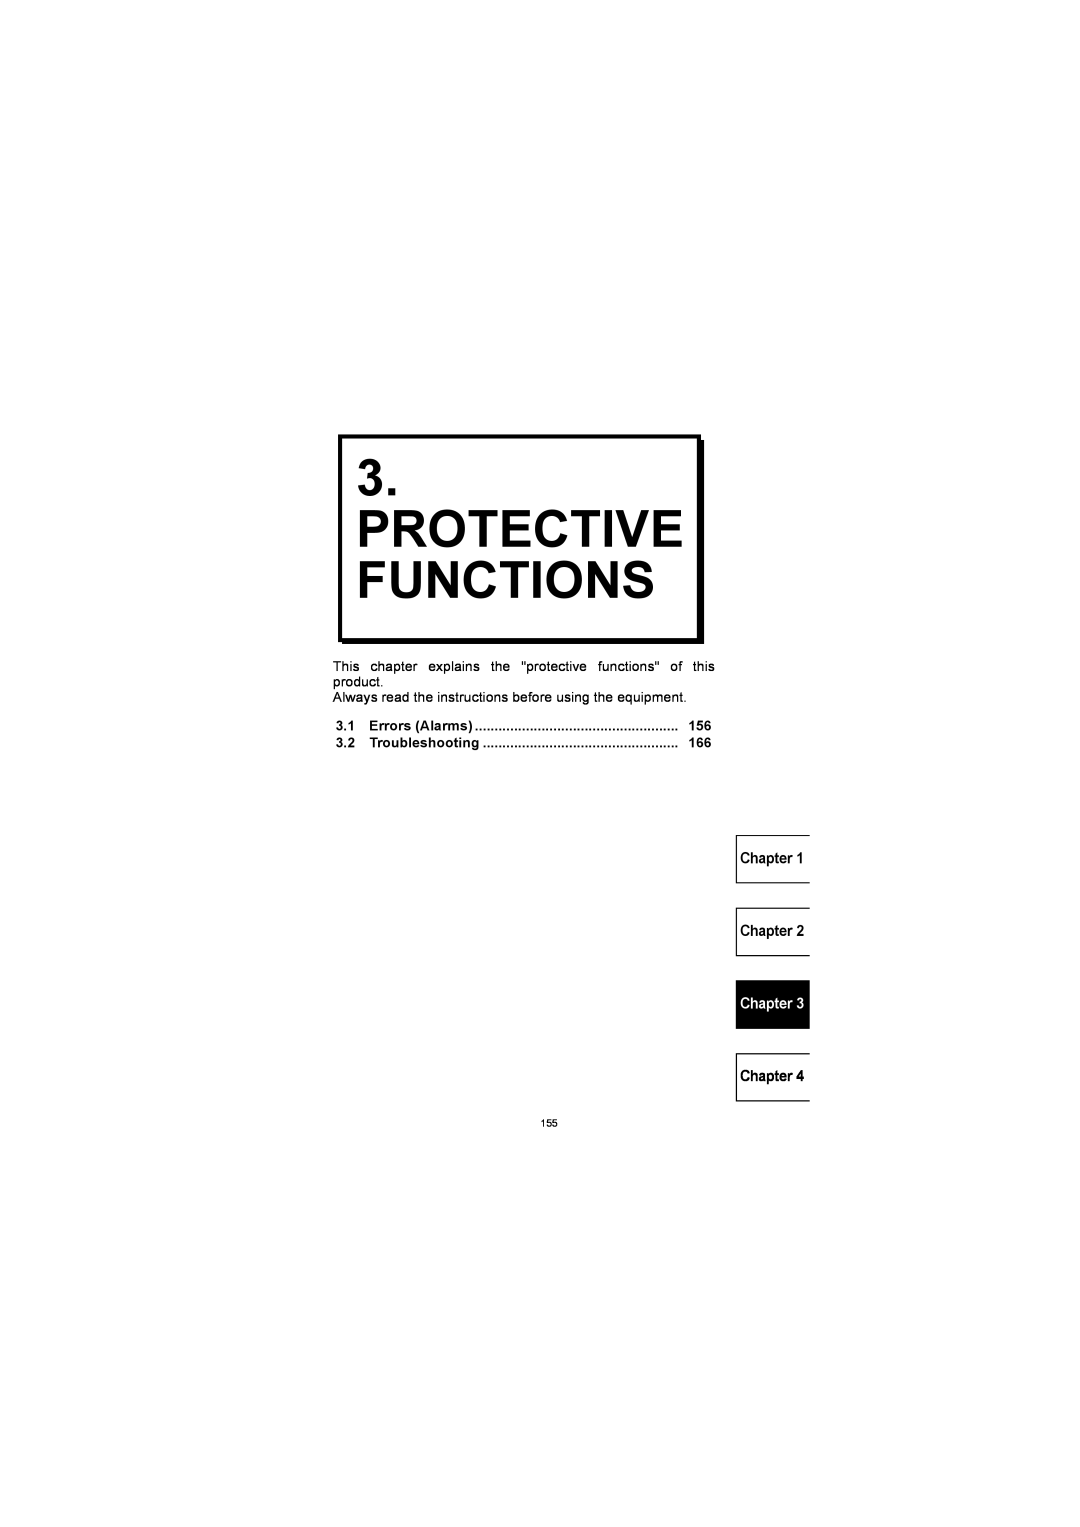 Mitsubishi Electronics FR-S500 Protective Functions, Chapter Chapter, product, Troubleshooting, Errors Alarms 